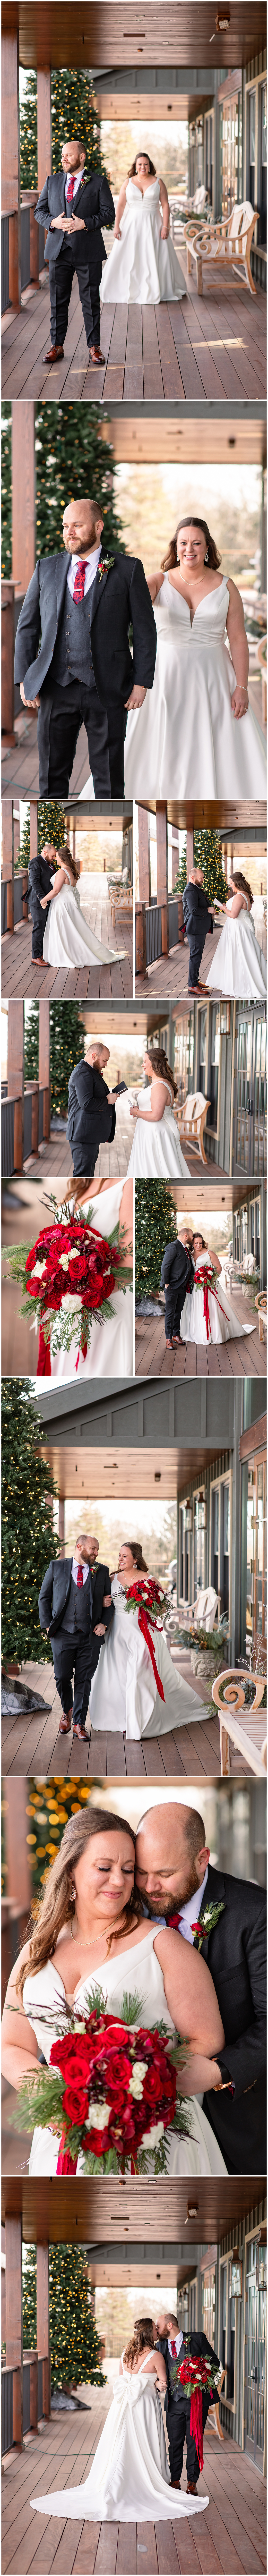 Round Lake Farms Wedding- First Look